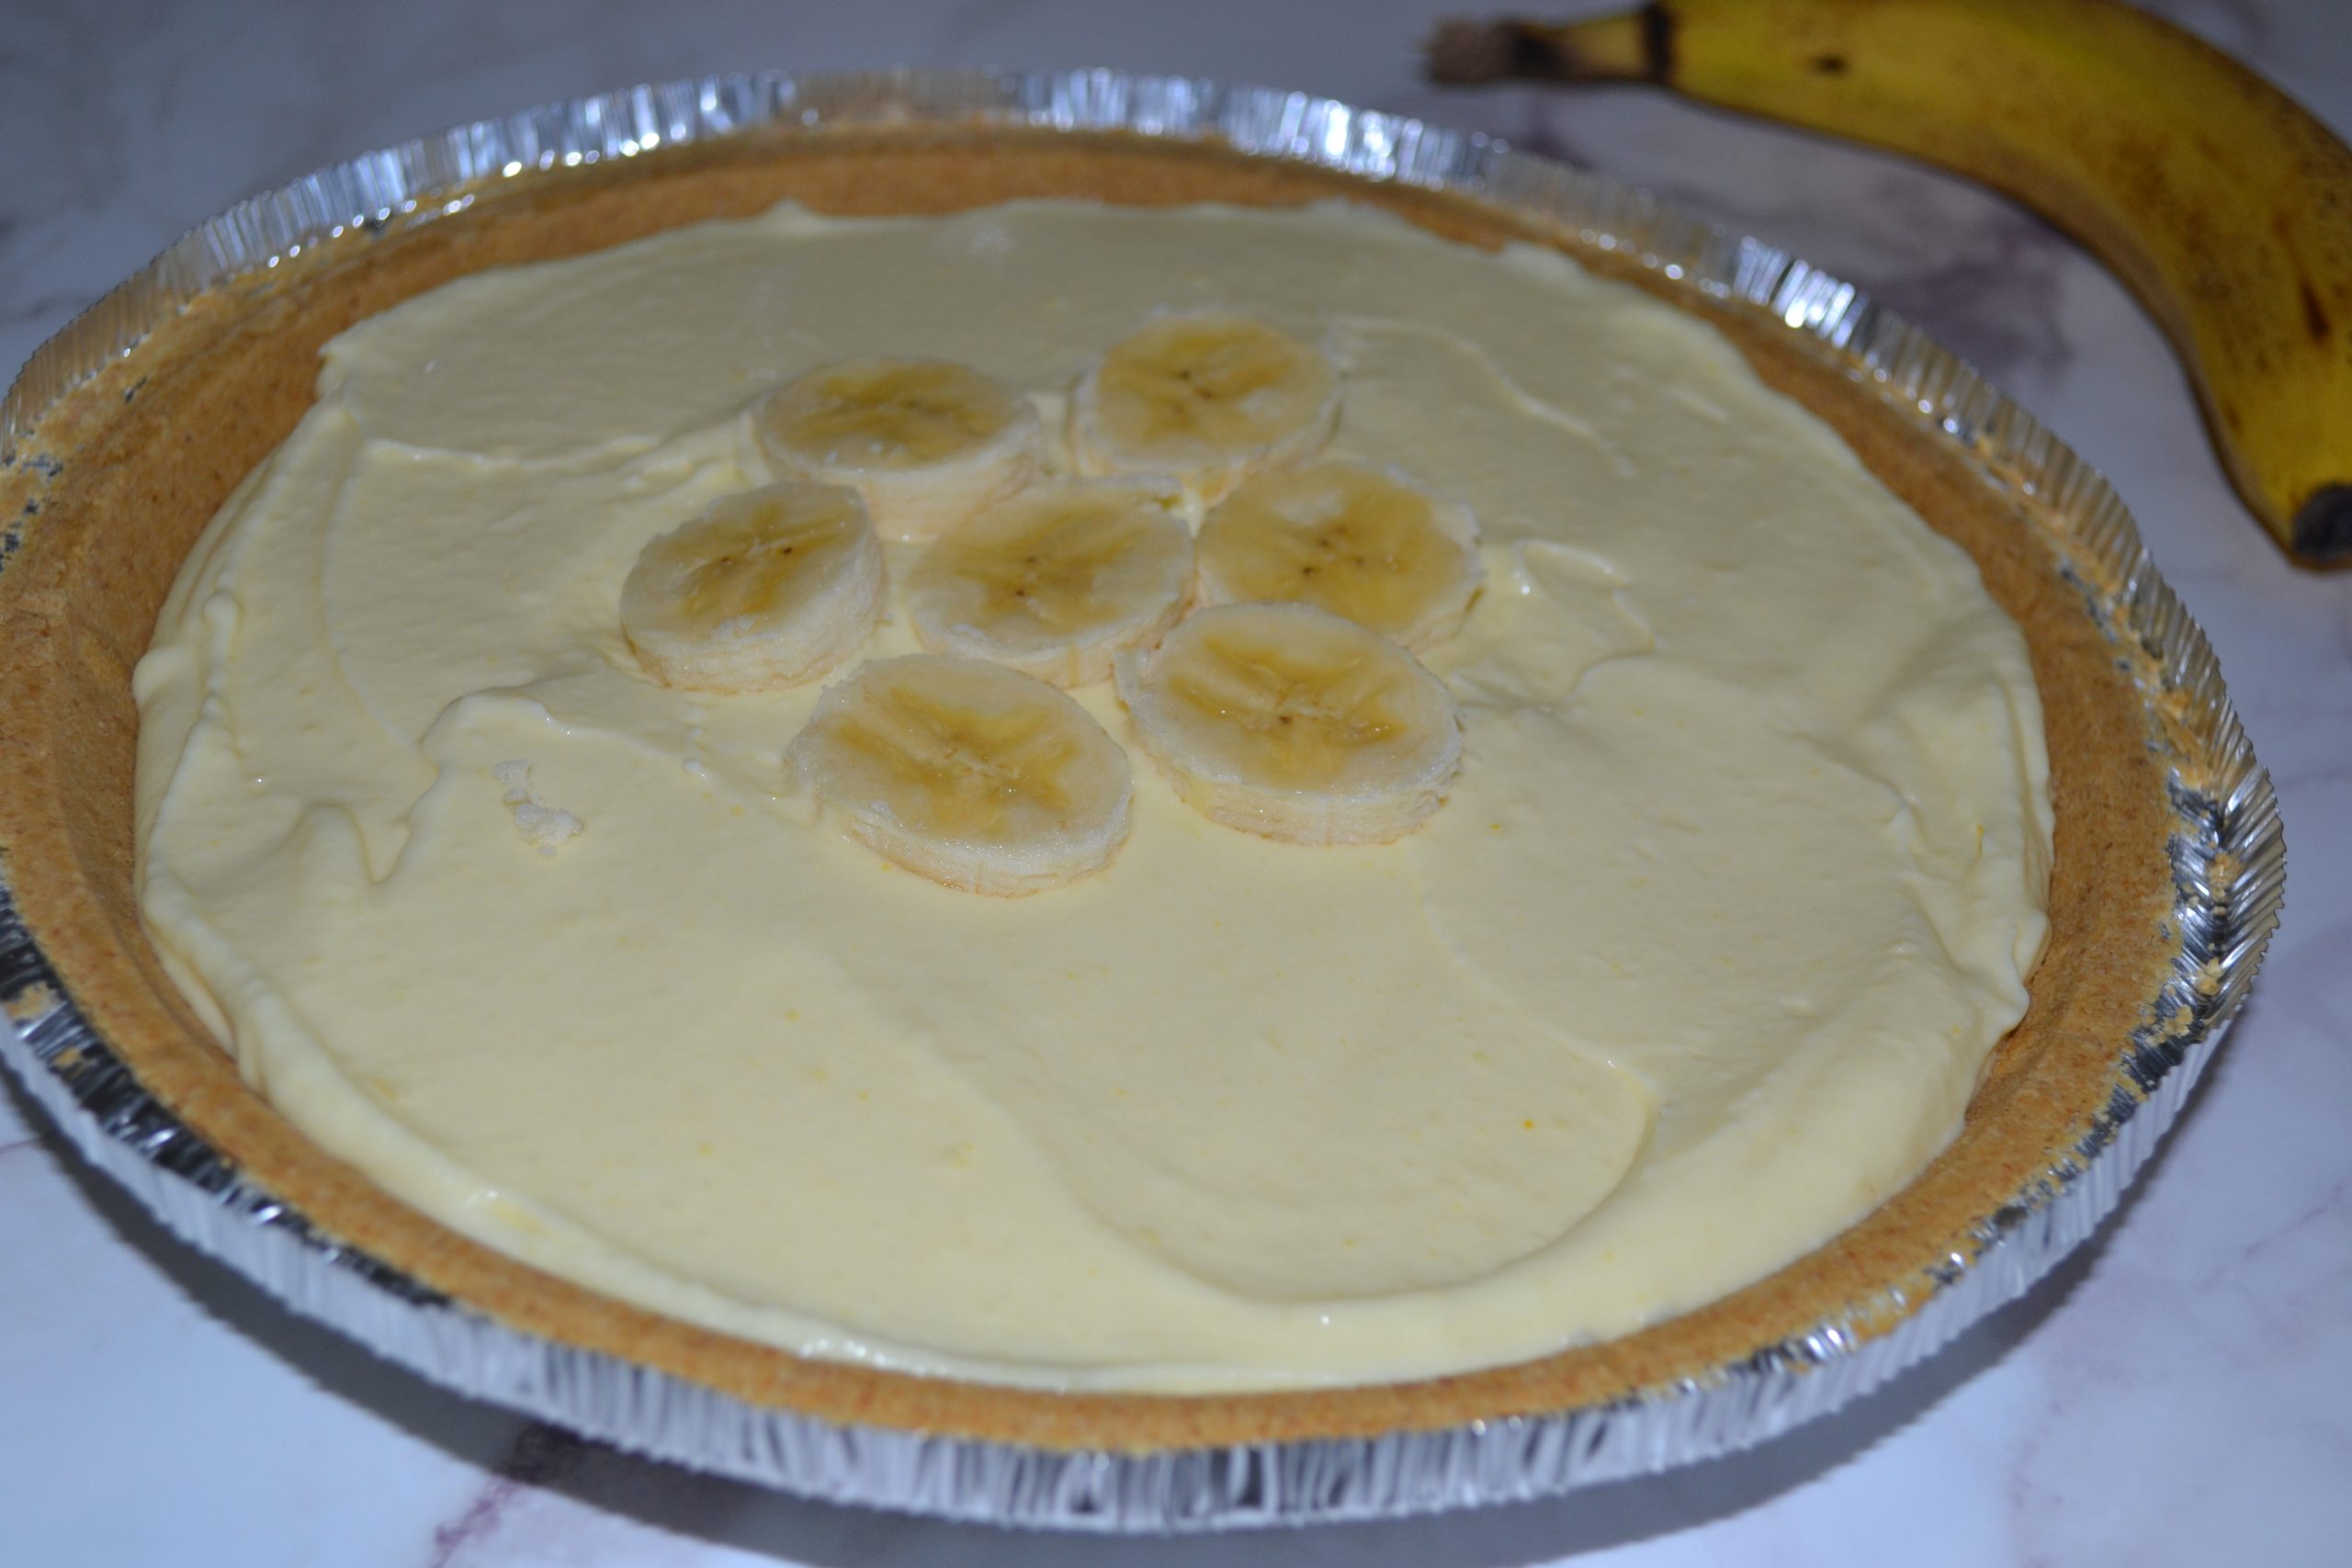 Recipe for an easy and quick banana cream pie